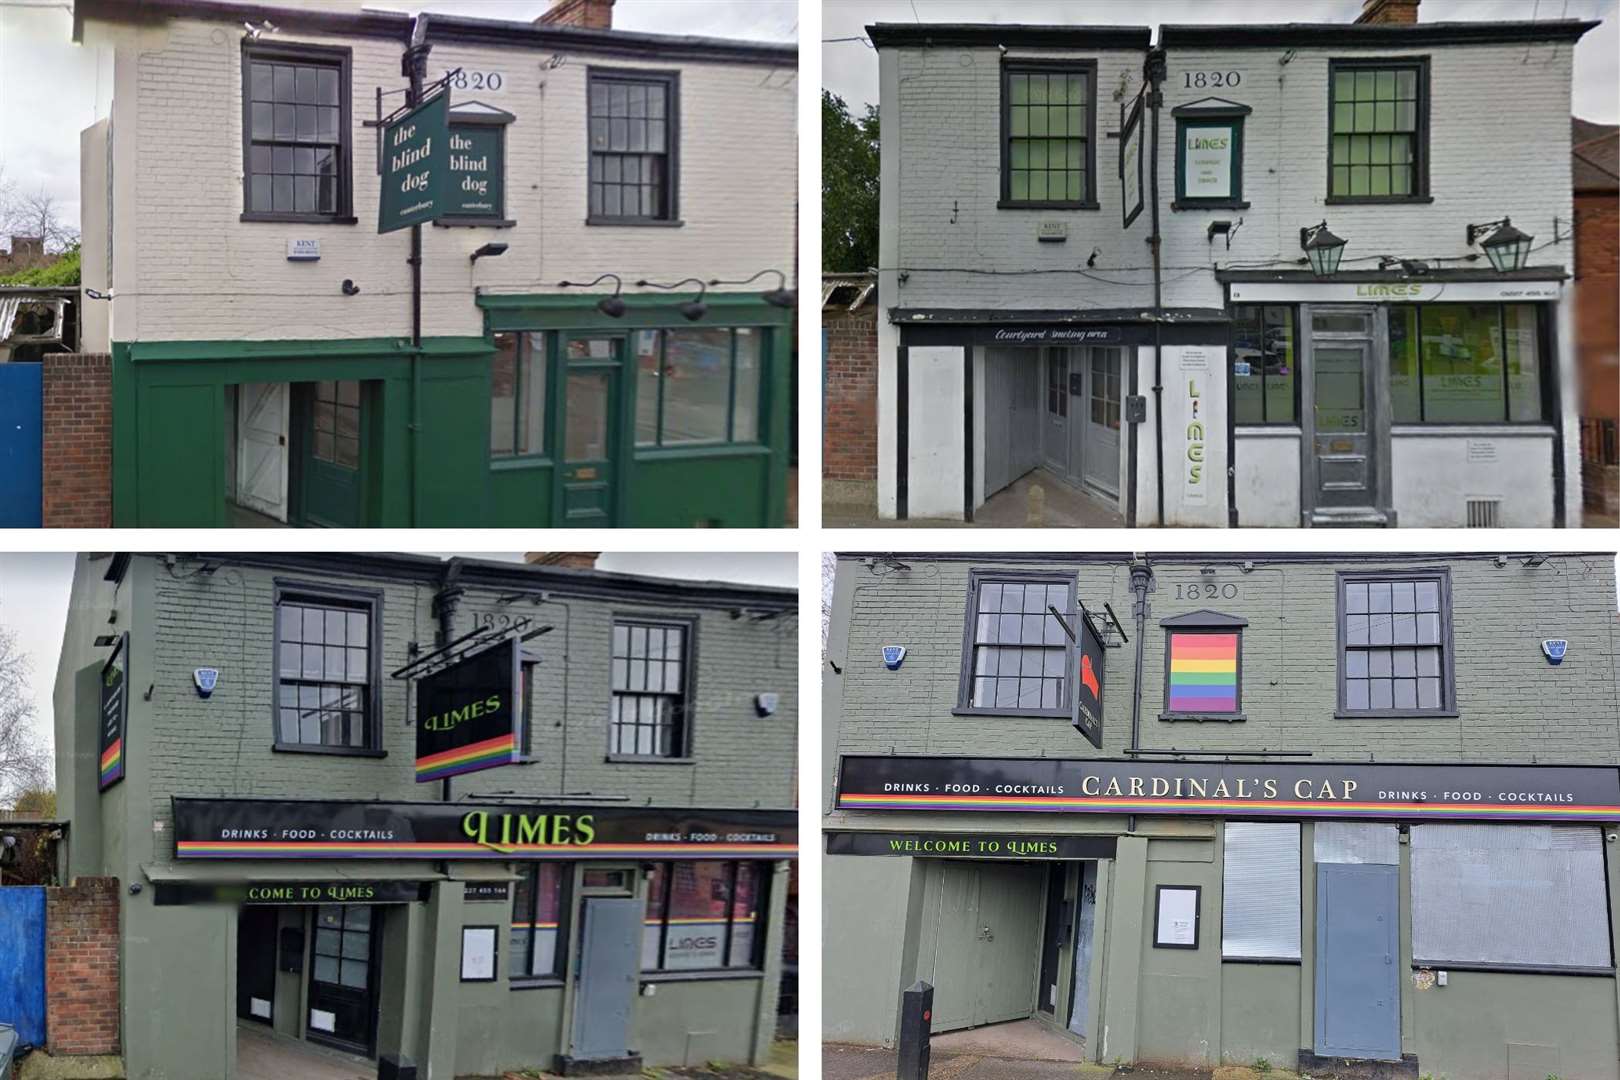 The venue as it was (from top left) The Blind Dog in 2009, Limes 2014, Limes 2022 and The Cardinal's Cap 2023